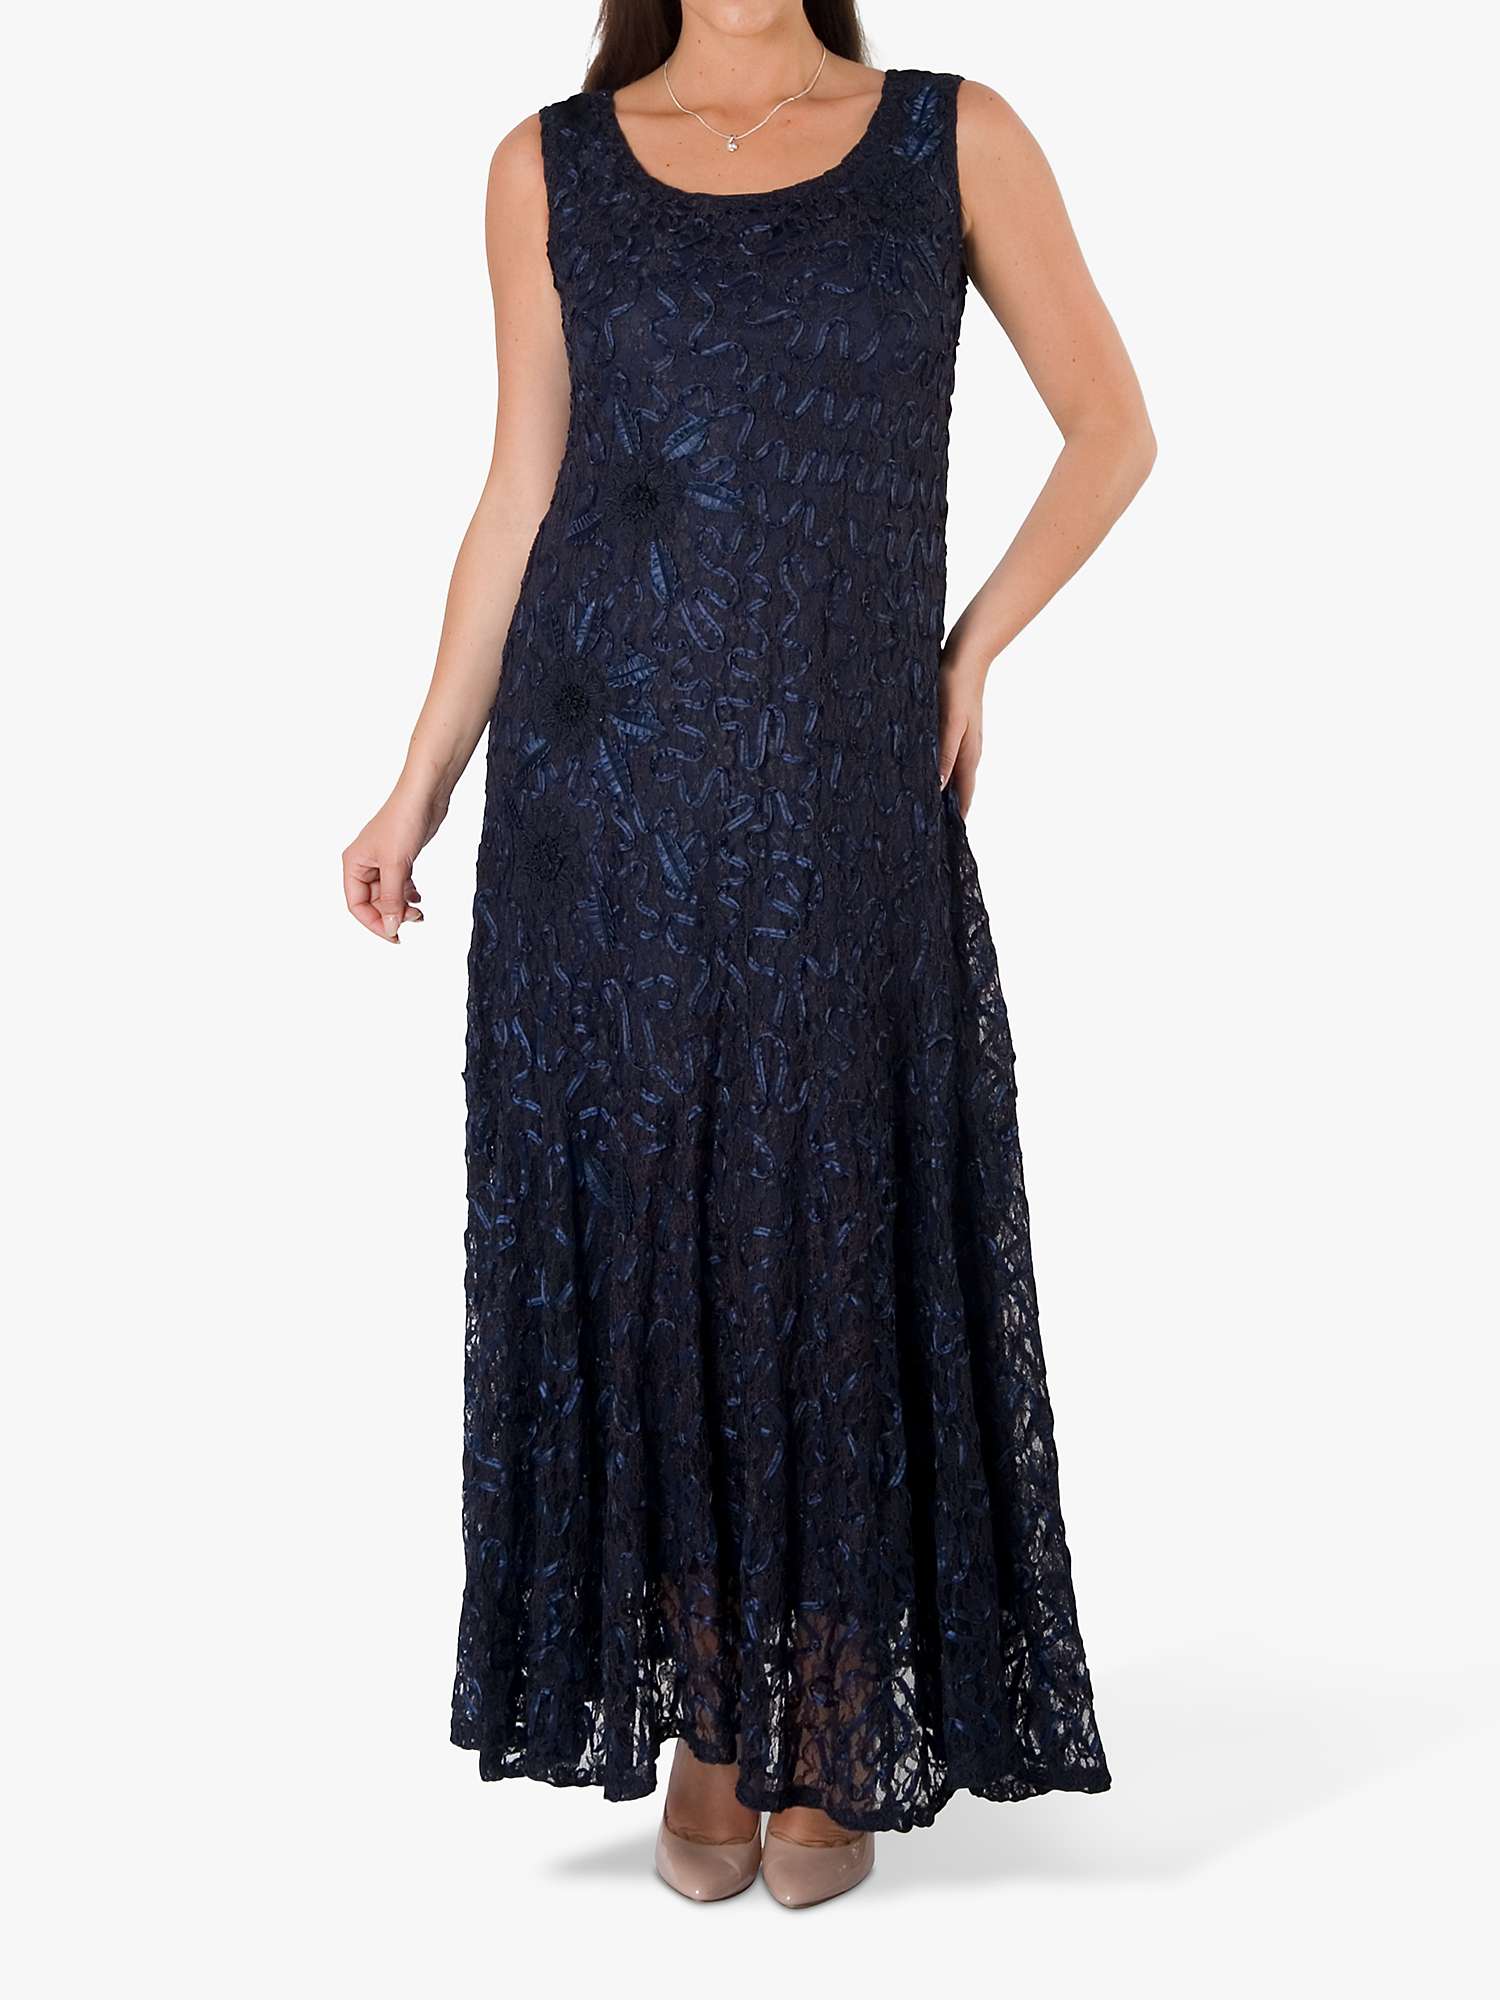 Buy Chesca Cornelli Lace Dress, Navy Online at johnlewis.com